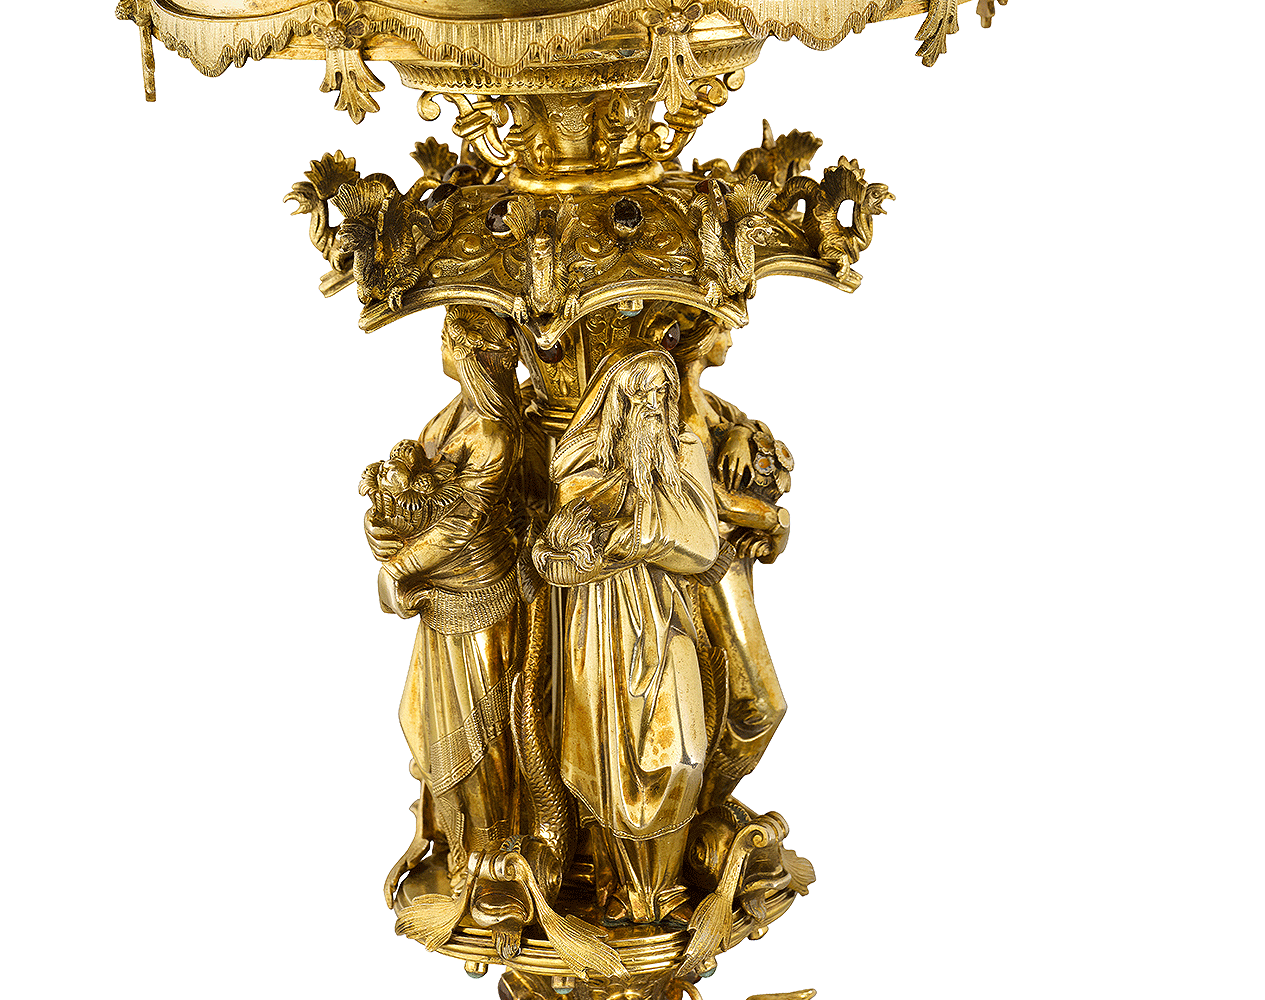 A silver-gilt mounted agate bowl, Prague or South German, late 16th/early  17th Century.